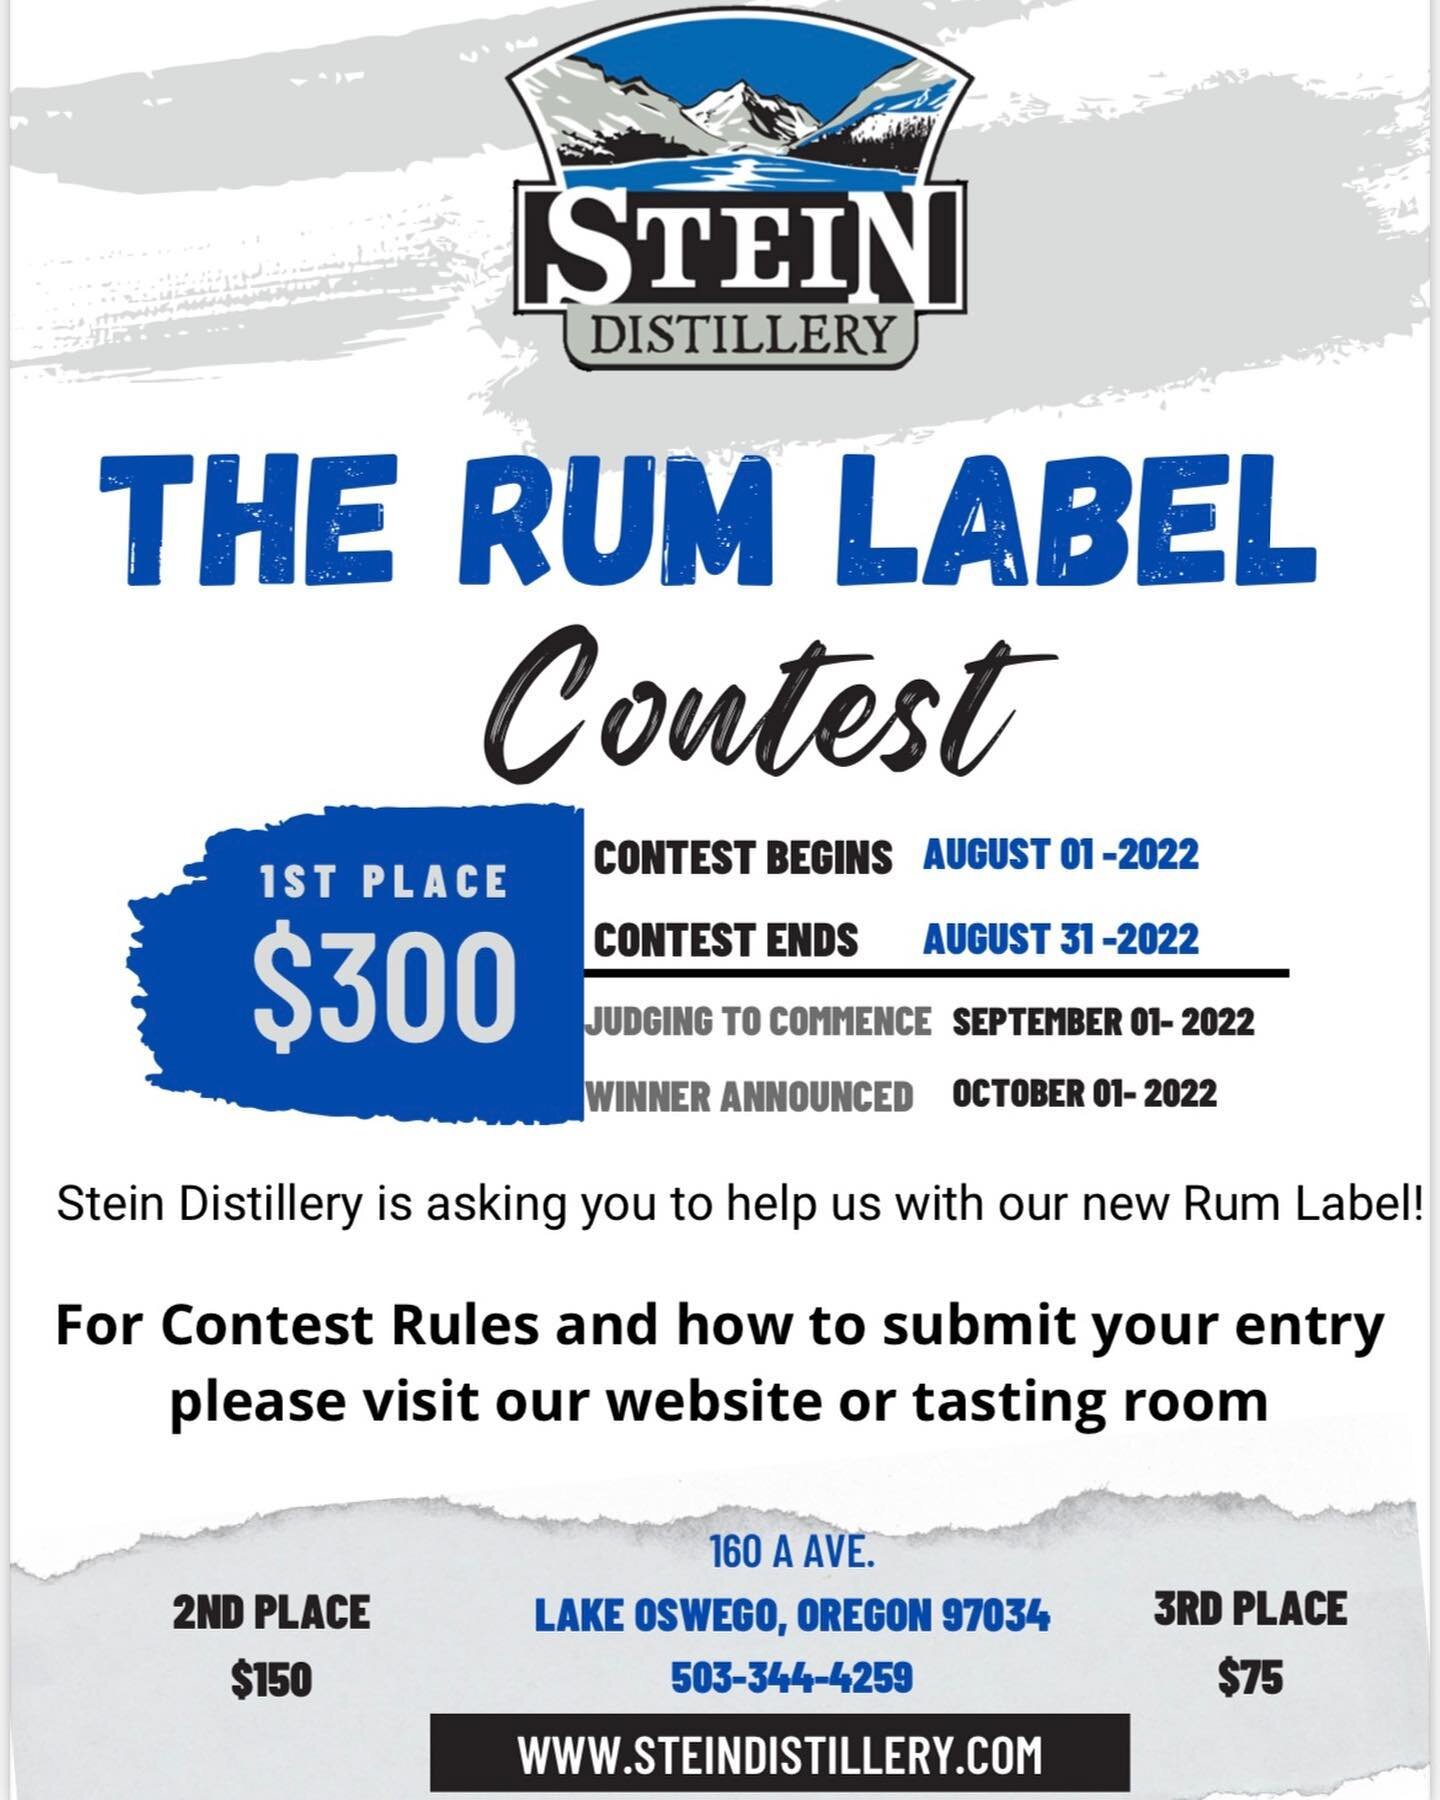 Rum Label Contest!

Stein Distillery is asking you to help us come up with our new Rum label!

Hand-crafted in Joseph, Oregon, our Stein Rum is distilled from cane sugar. We then use our whiskey barrels to age the rum to perfection. The barrel aging 